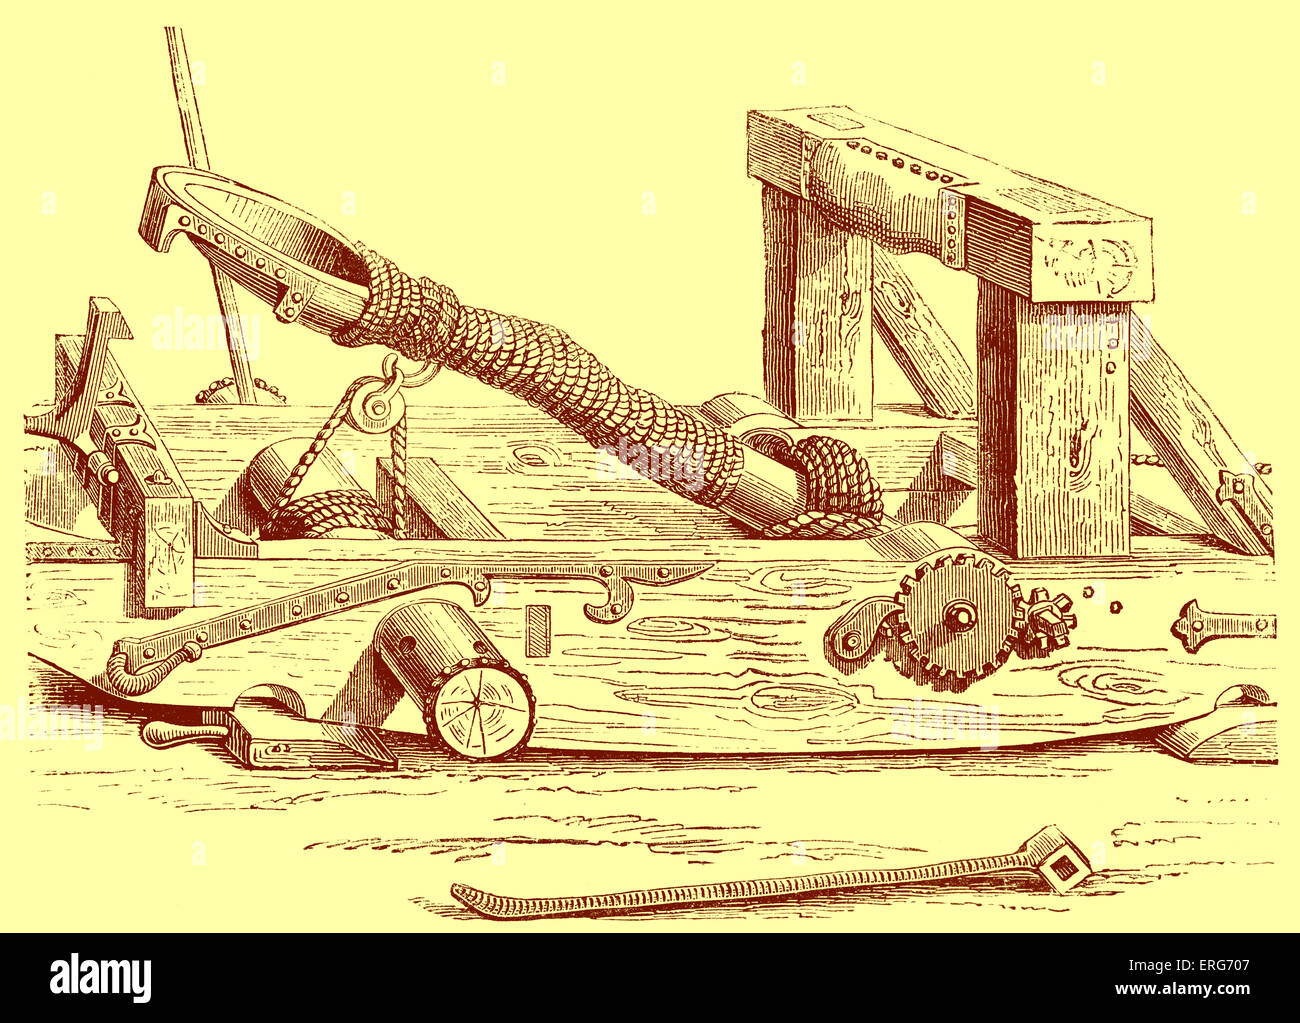 Mangonel, a medieval siege engine used to throw projectiles. Stock Photo